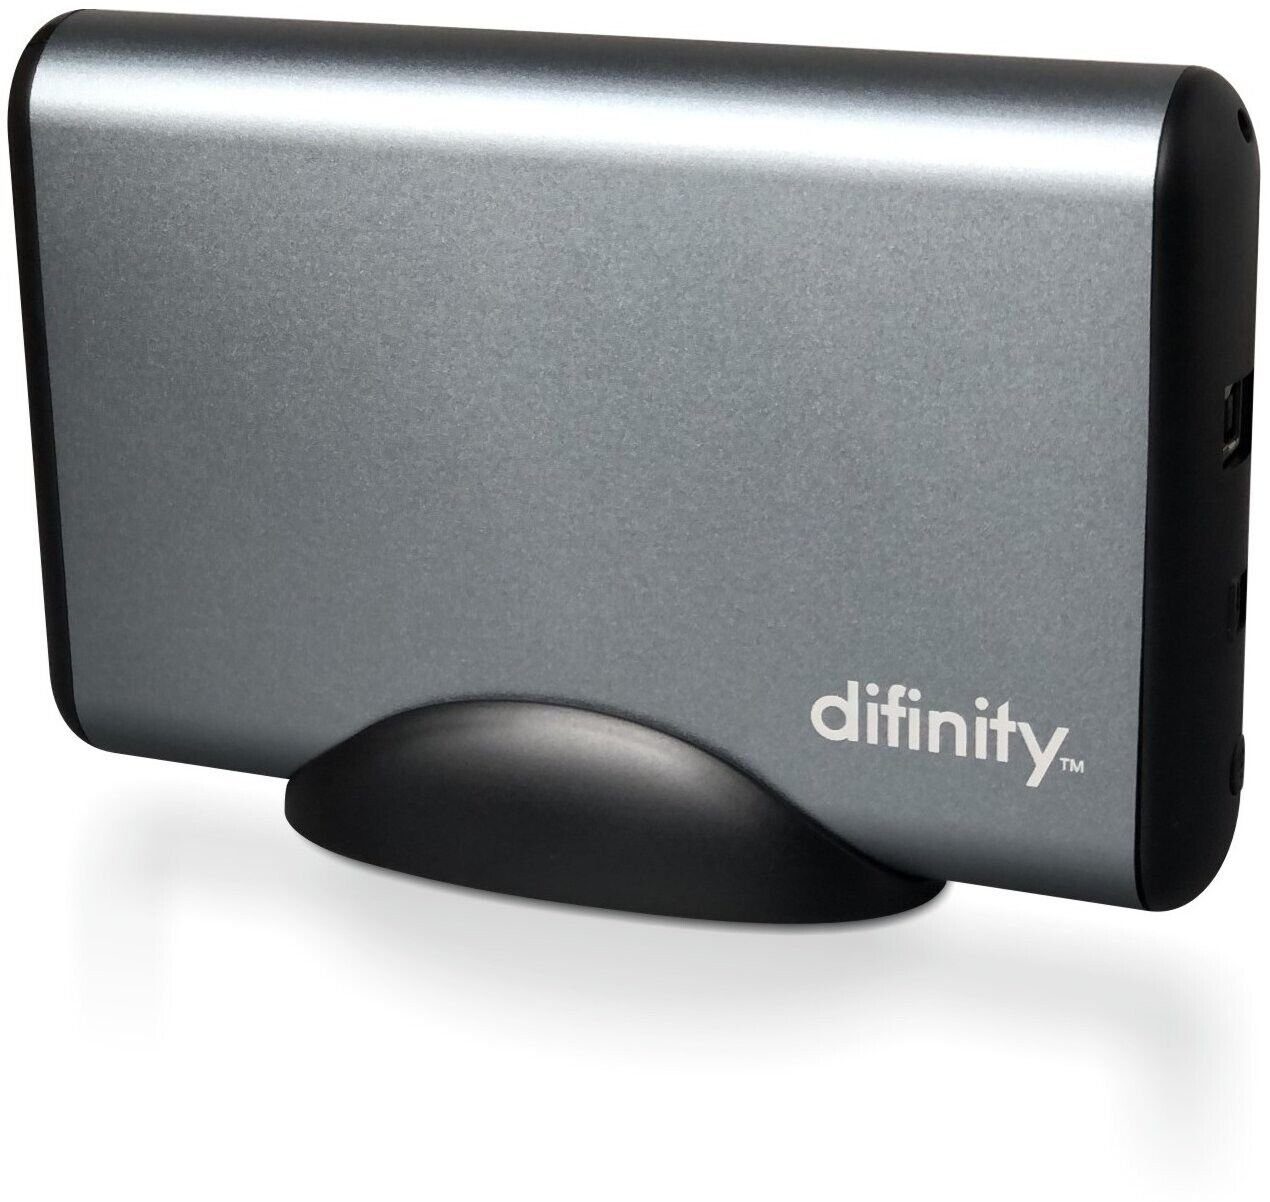 X-HARDWARE Difinity externe HDD-Festplatte (8 TB) 3,5\